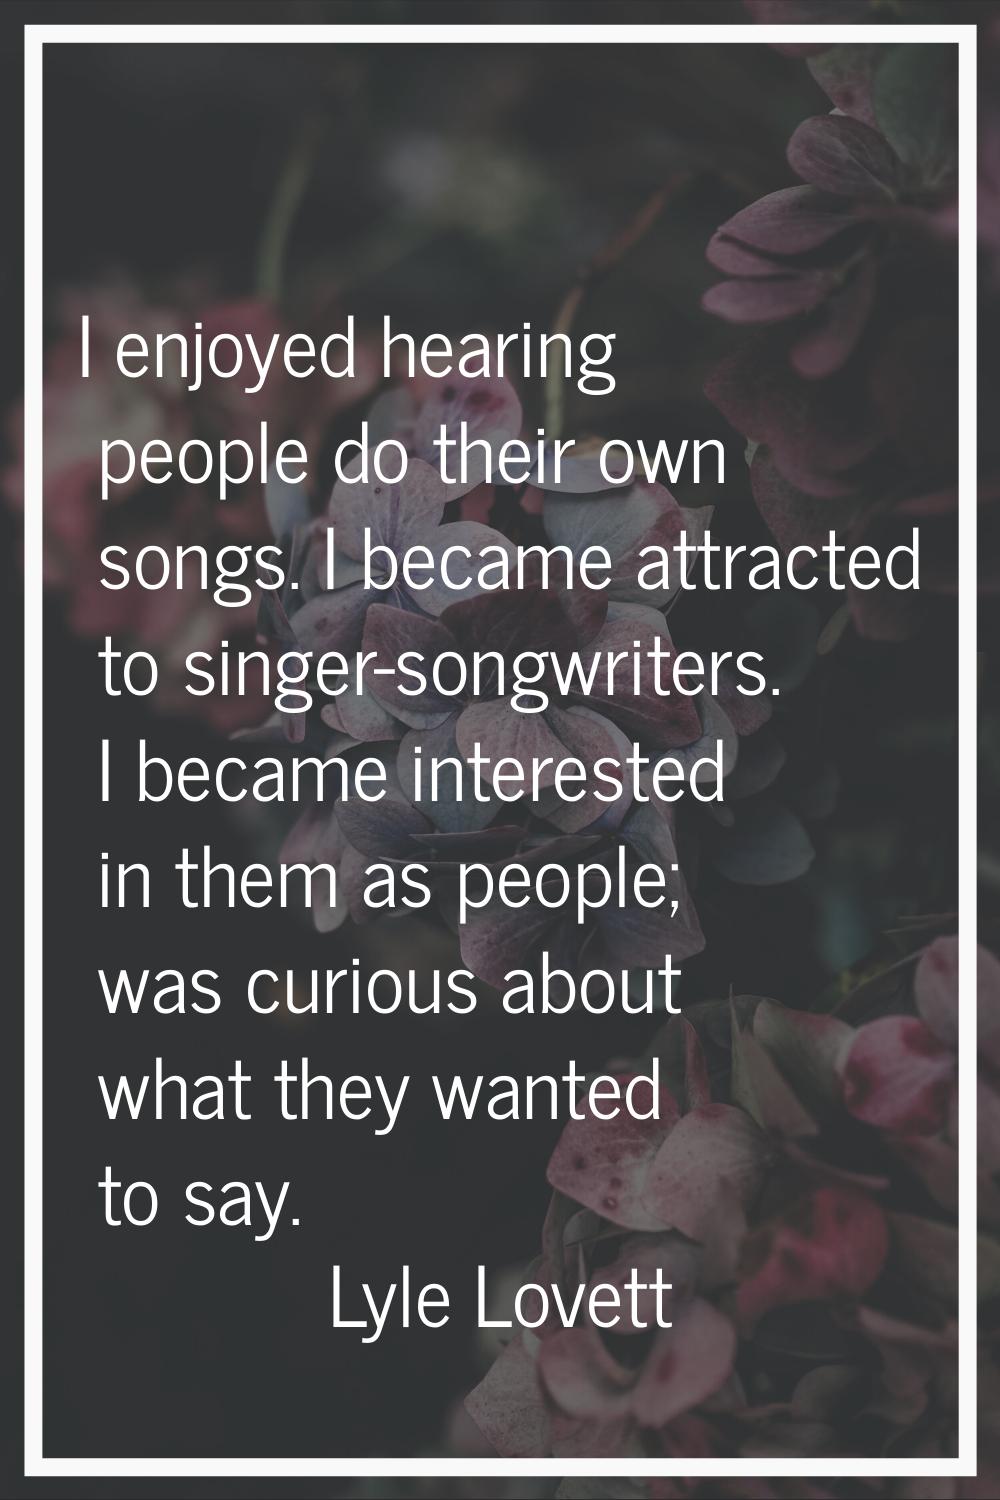 I enjoyed hearing people do their own songs. I became attracted to singer-songwriters. I became int